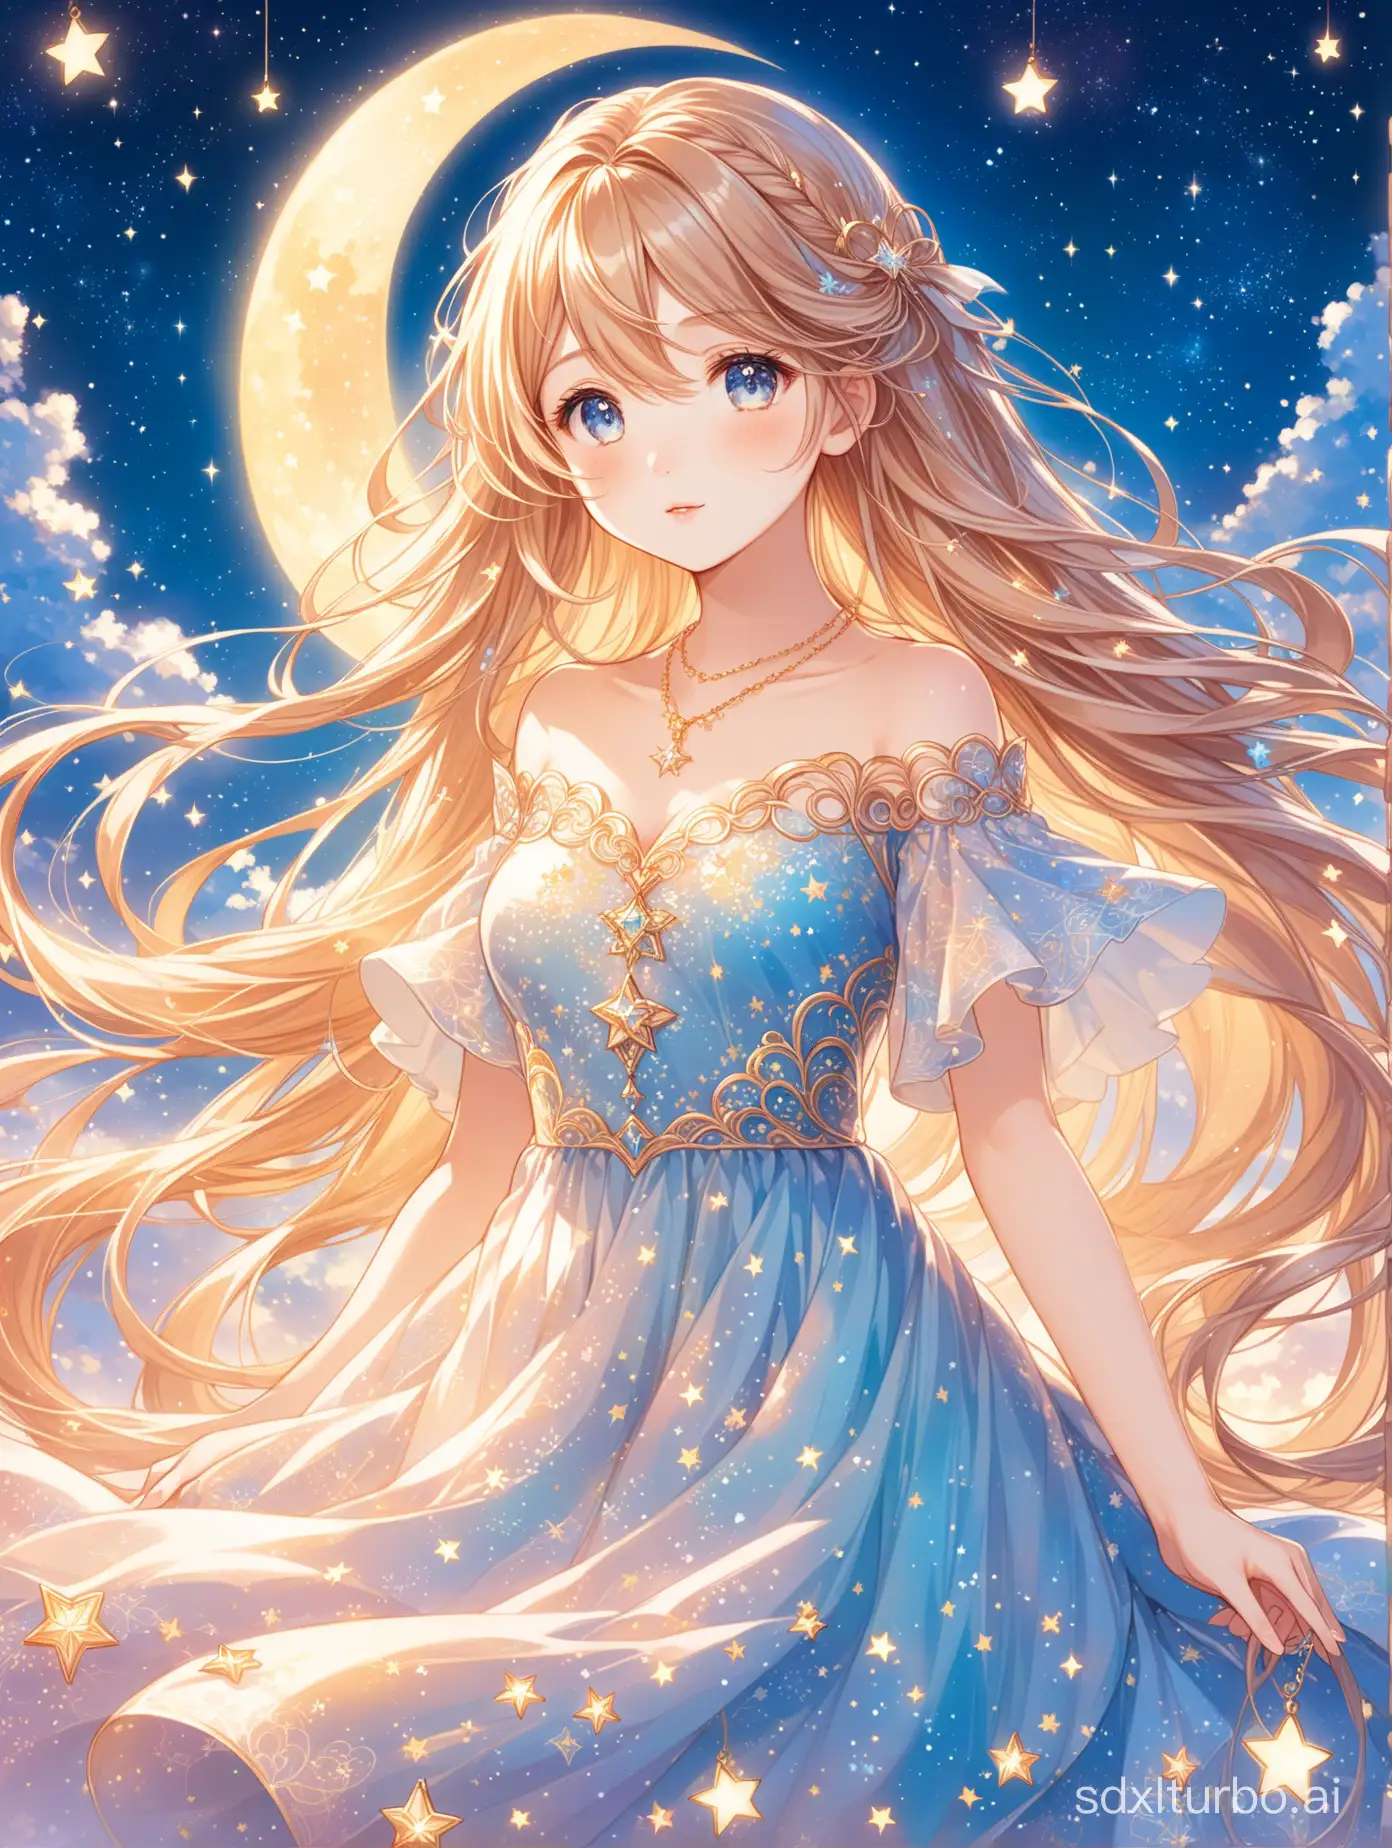 A captivating, full-body anime illustration of a charming girl with long, flowing hair and a beautiful face. Her eyes are large and expressive, filled with innocence and cuteness. The character wears a stunning dress adorned with delicate patterns and a gold necklace, complementing her ethereal appearance. The sky behind her is filled with stars, creating a dreamy and fantastical atmosphere. The character's hair features two different shades, one lighter near the roots, and one darker towards the tips, giving it a unique and soft luster. The overall style of the artwork is dreamy and romantic, inspired by the enchanting world of anime.